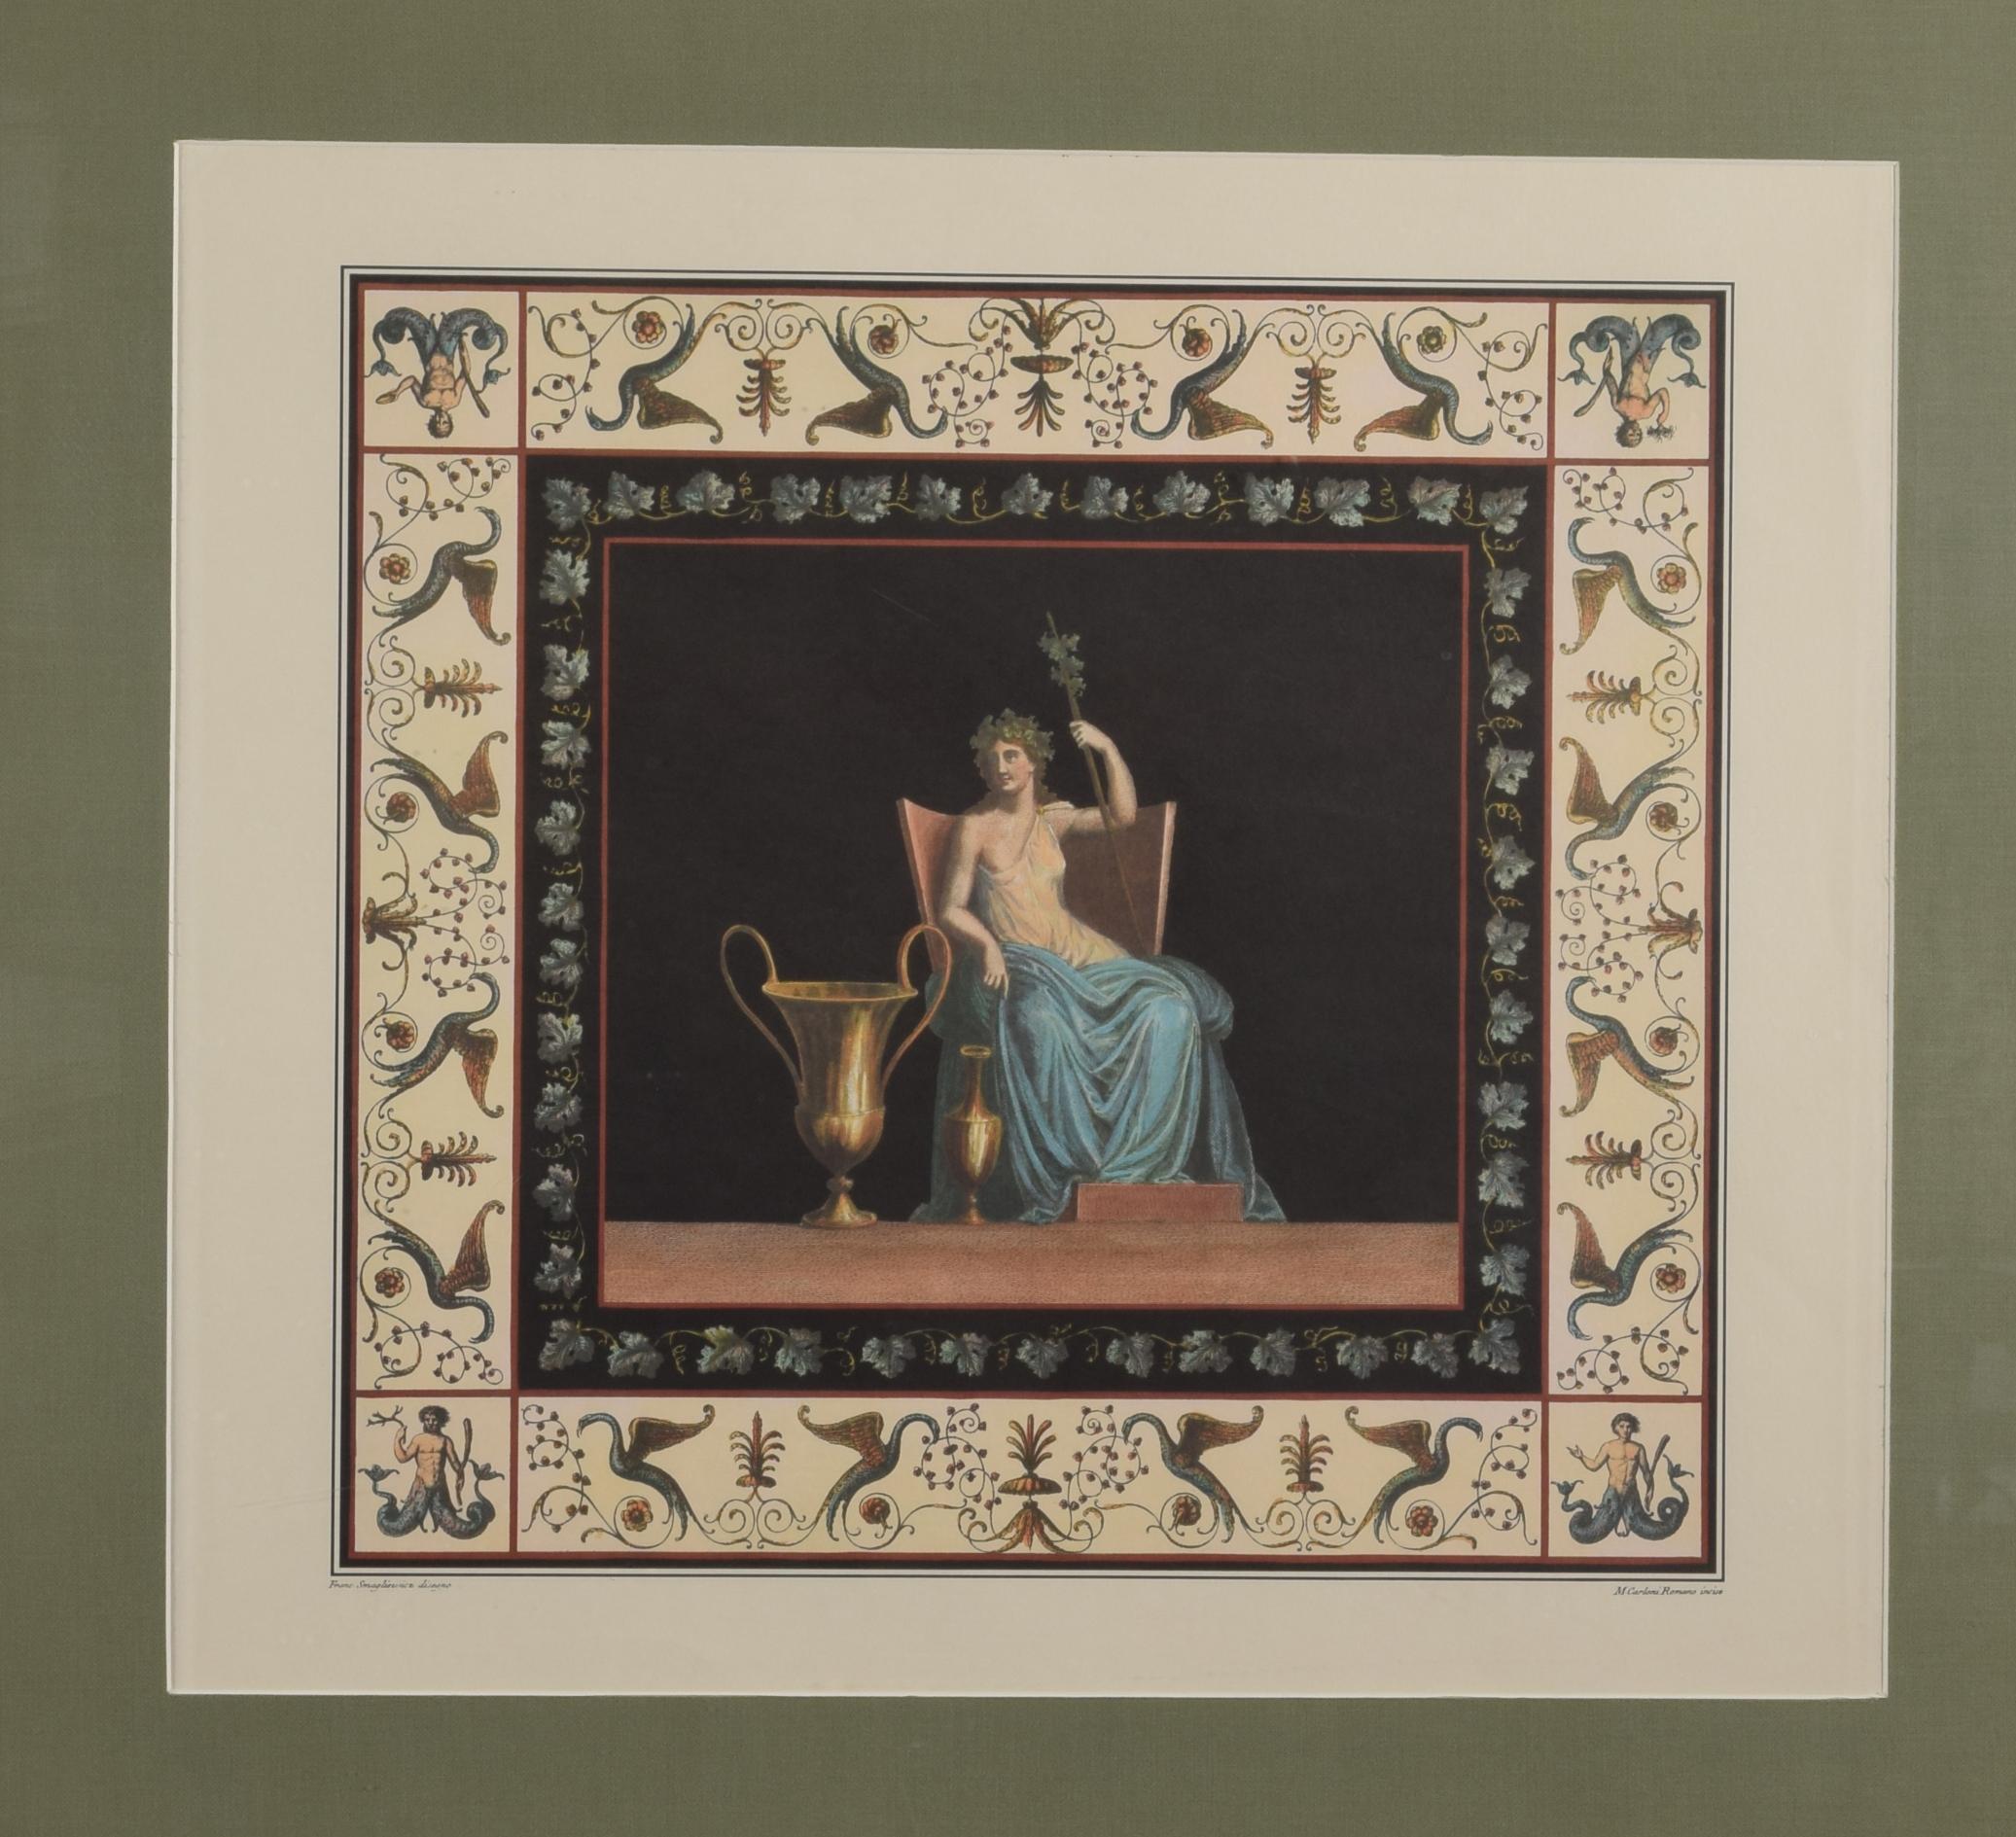 Framed lithograph, fresco from Nero's Domus Aurea (Rome). Engraved by Carlo Romano, following design by Francesco Smuglewicz.
 Painted lithograph showing a grotesque frame with plant elements and mythological creatures in the corners and a seated